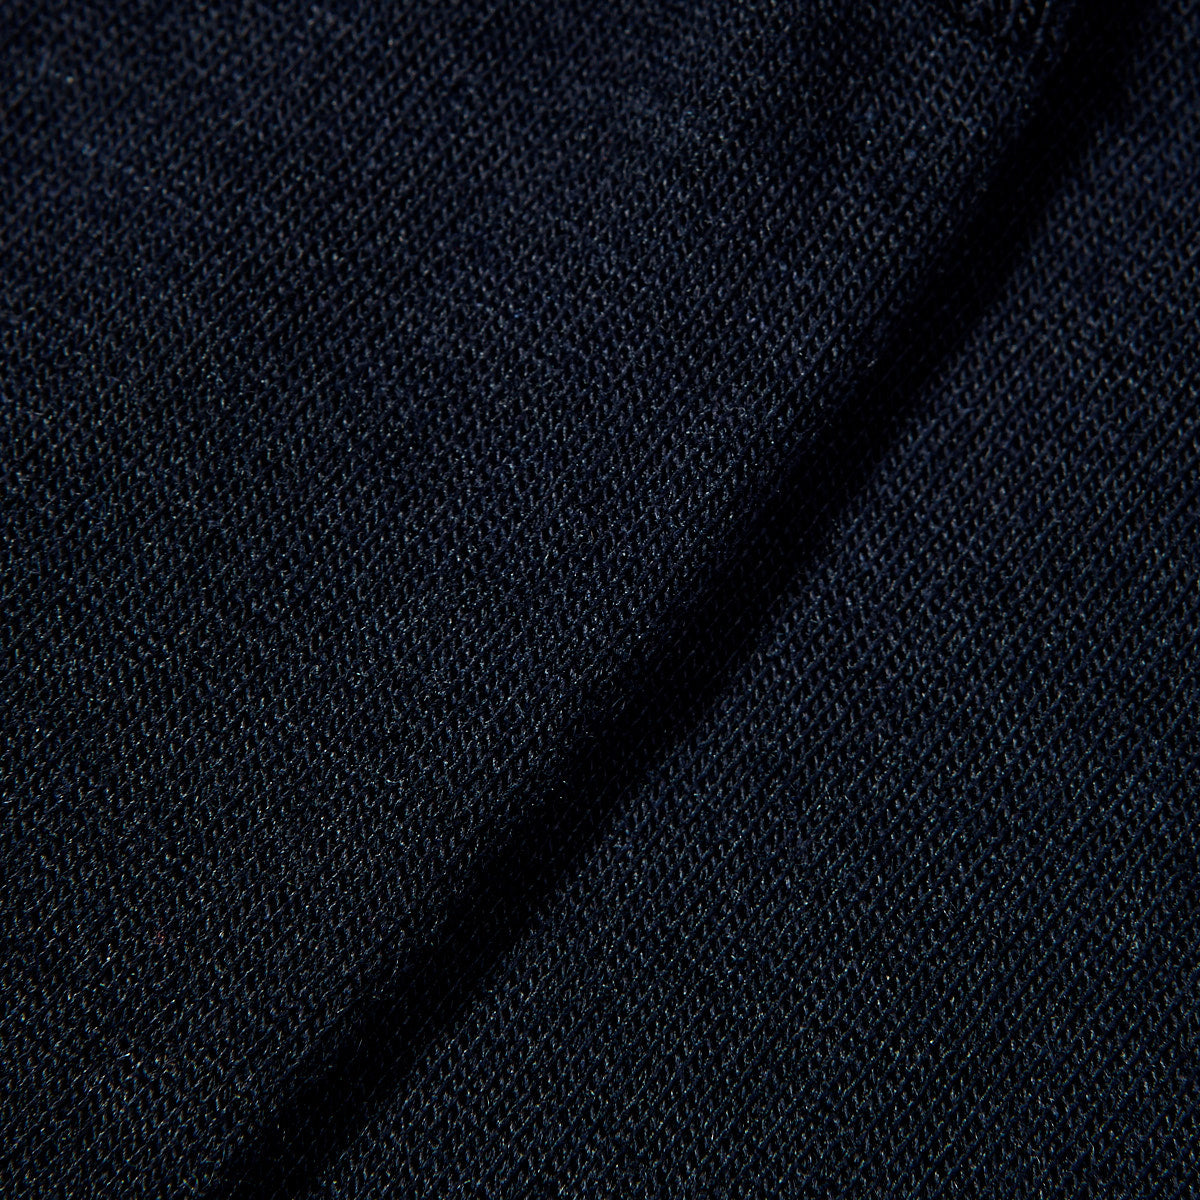 A close up image of Falke Navy Airport Wool Cotton Socks made of merino wool for temperature regulation.